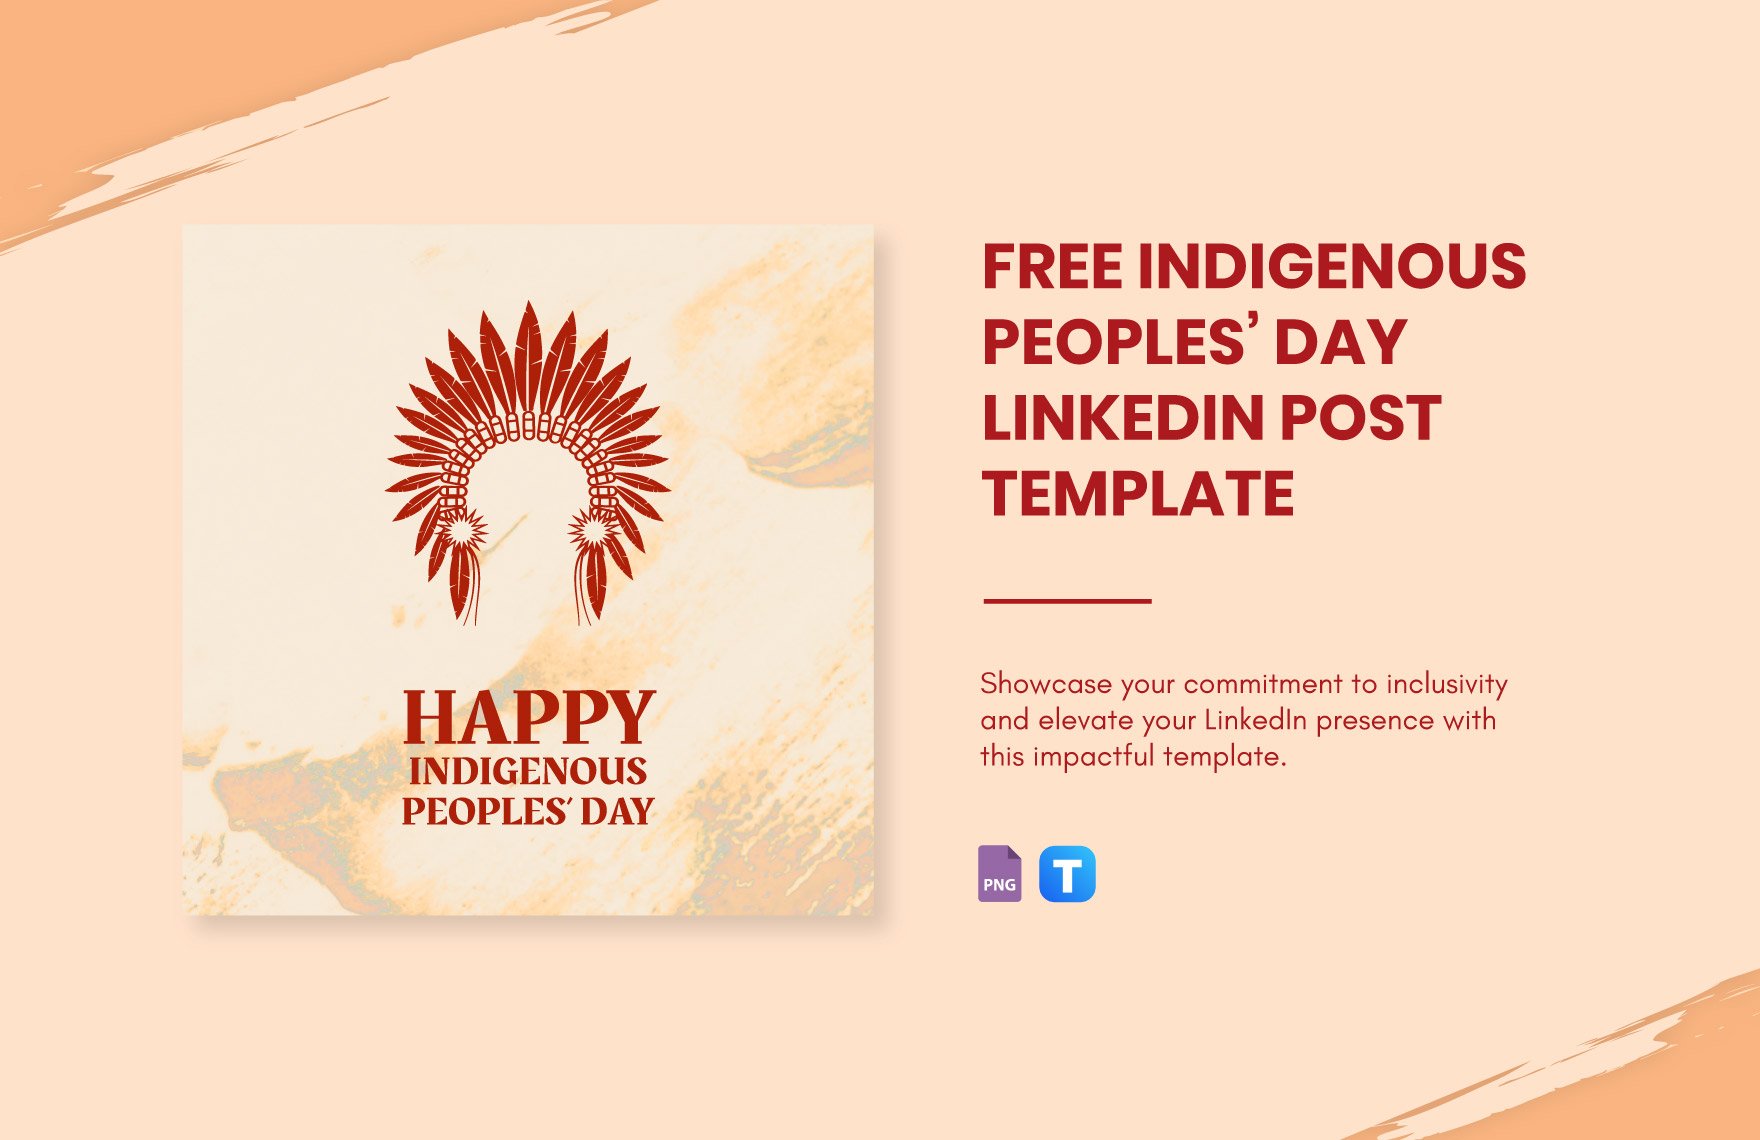 Free Indigenous Peoples' Day LinkedIn Post Template in PNG